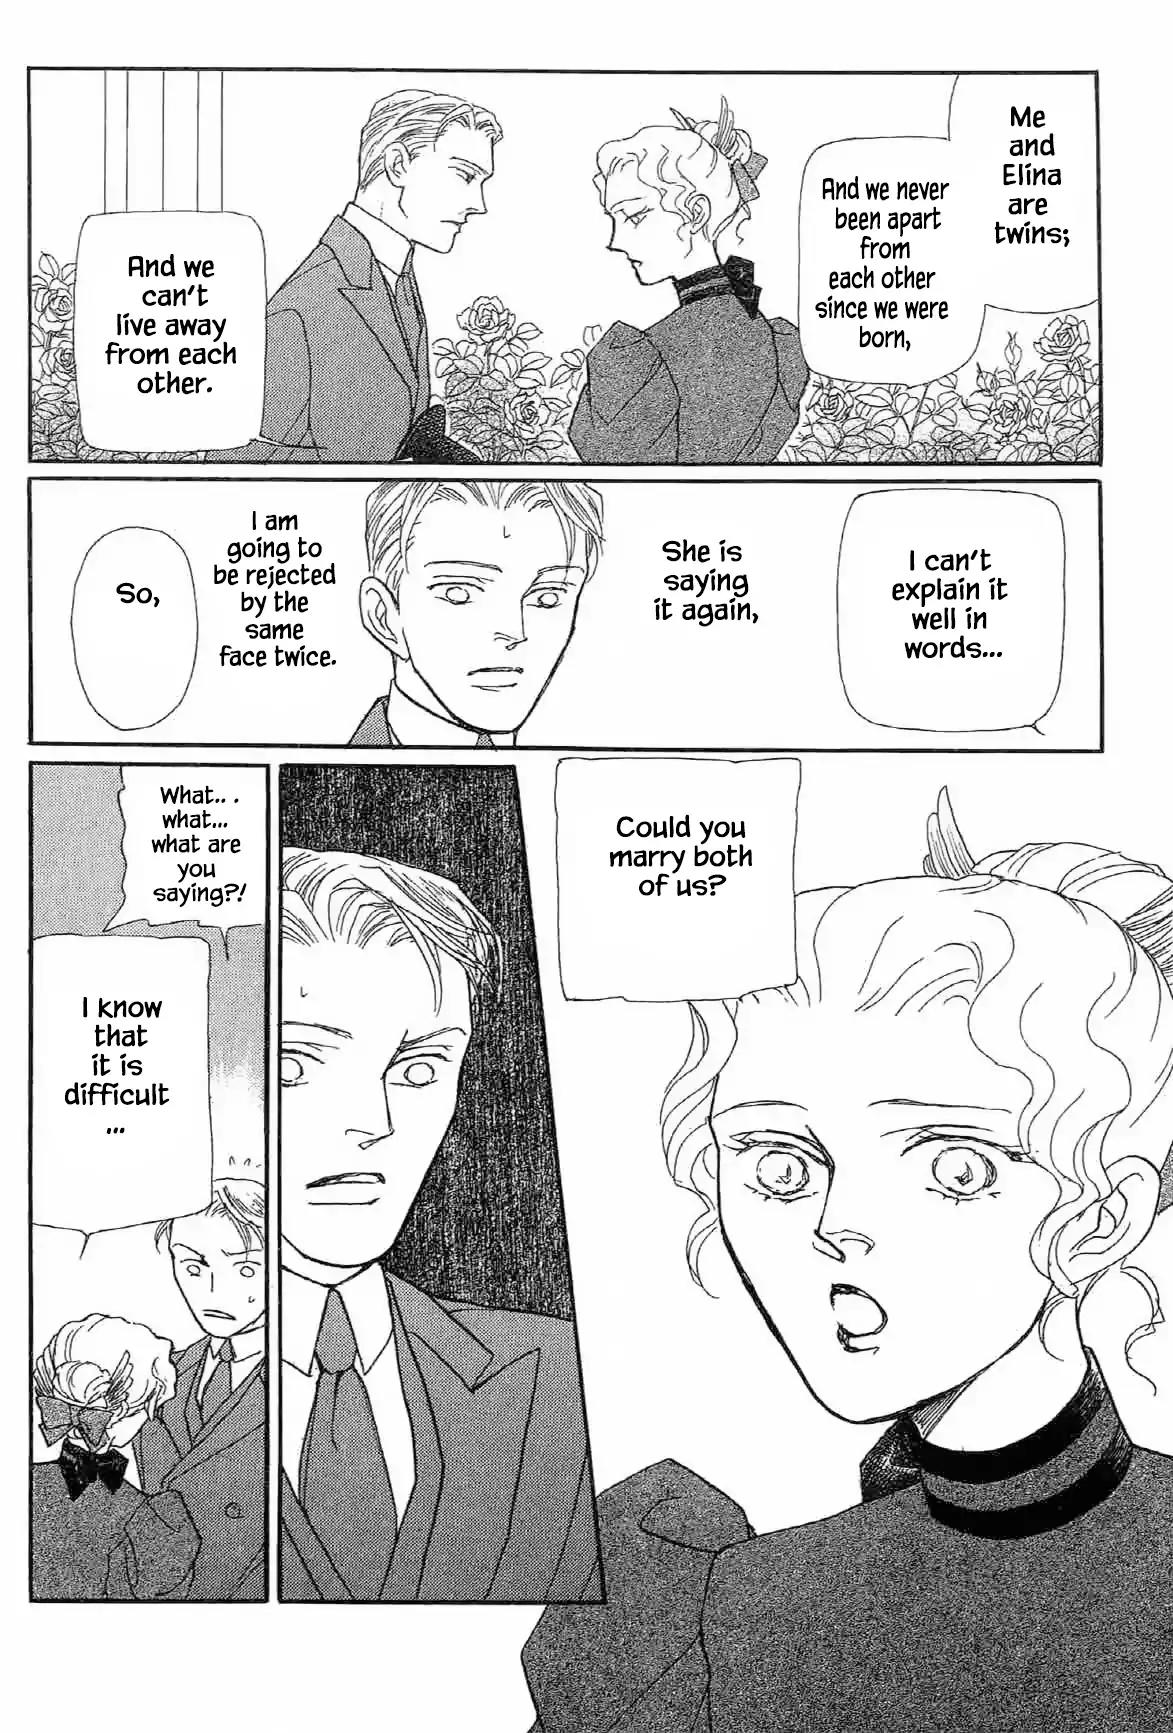 Beautiful England Series Vol.2 Chapter 10.2